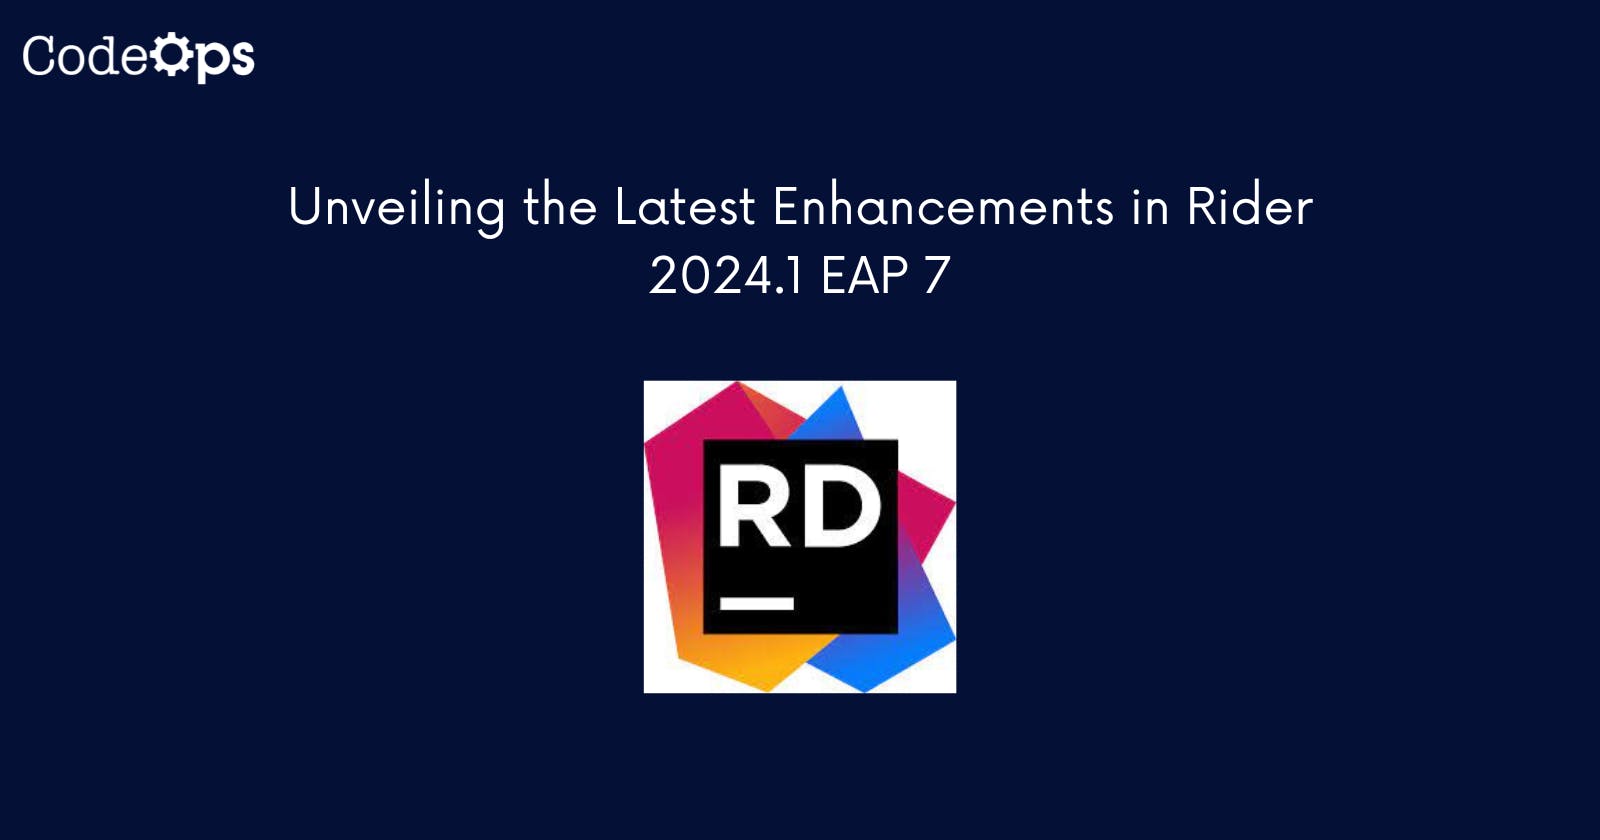 Unveiling the Latest Enhancements in Rider 2024.1 EAP 7